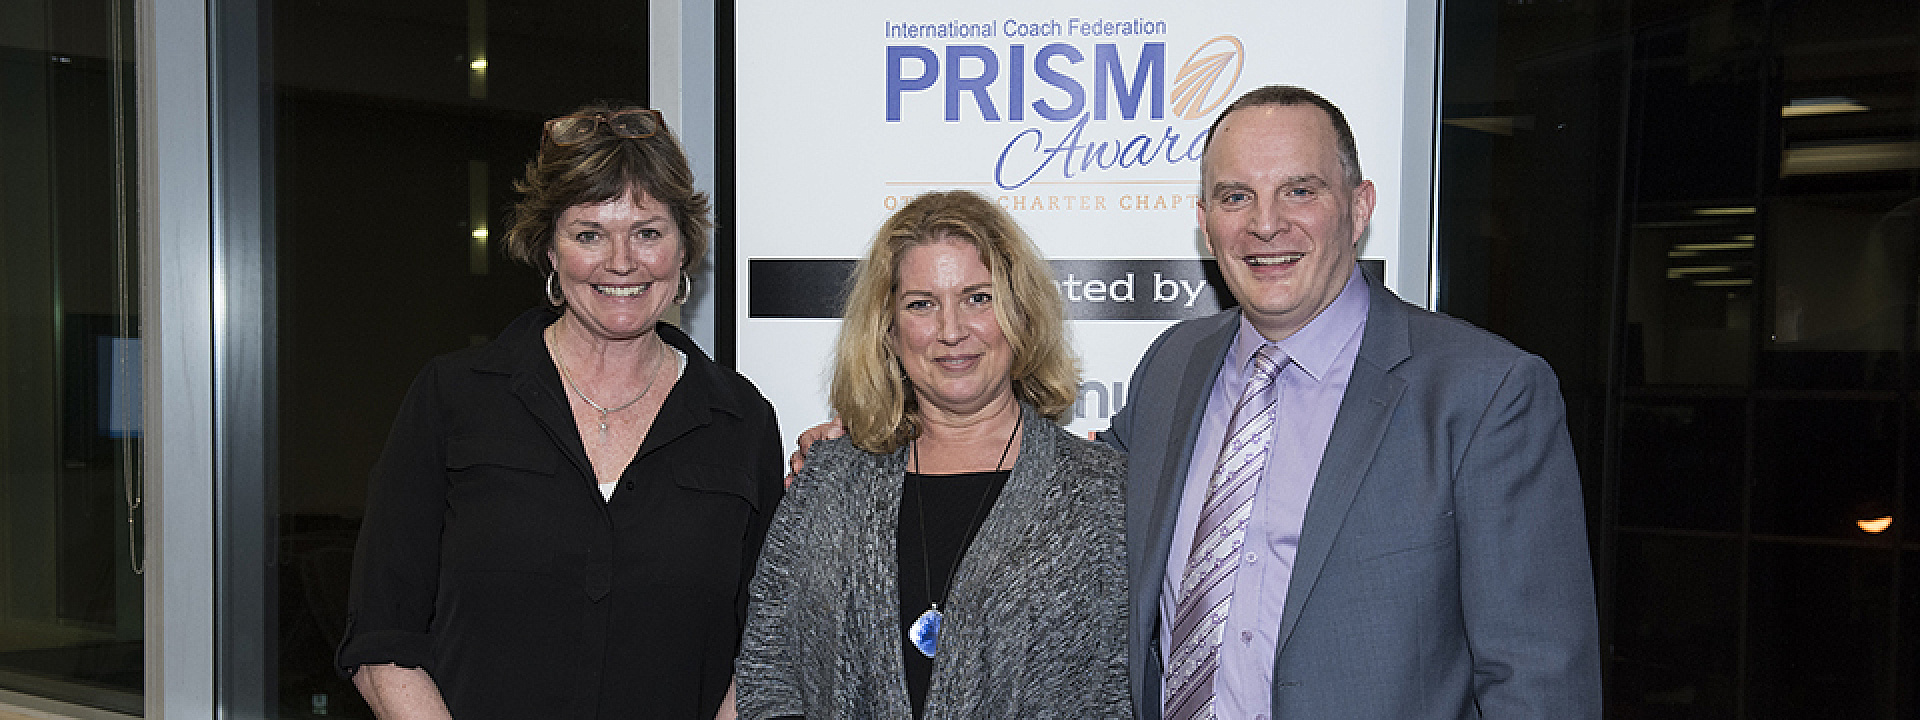 Prism Awards organizing committee - Jennifer MacLeod, Judy Mouland, and Denis Lévesque